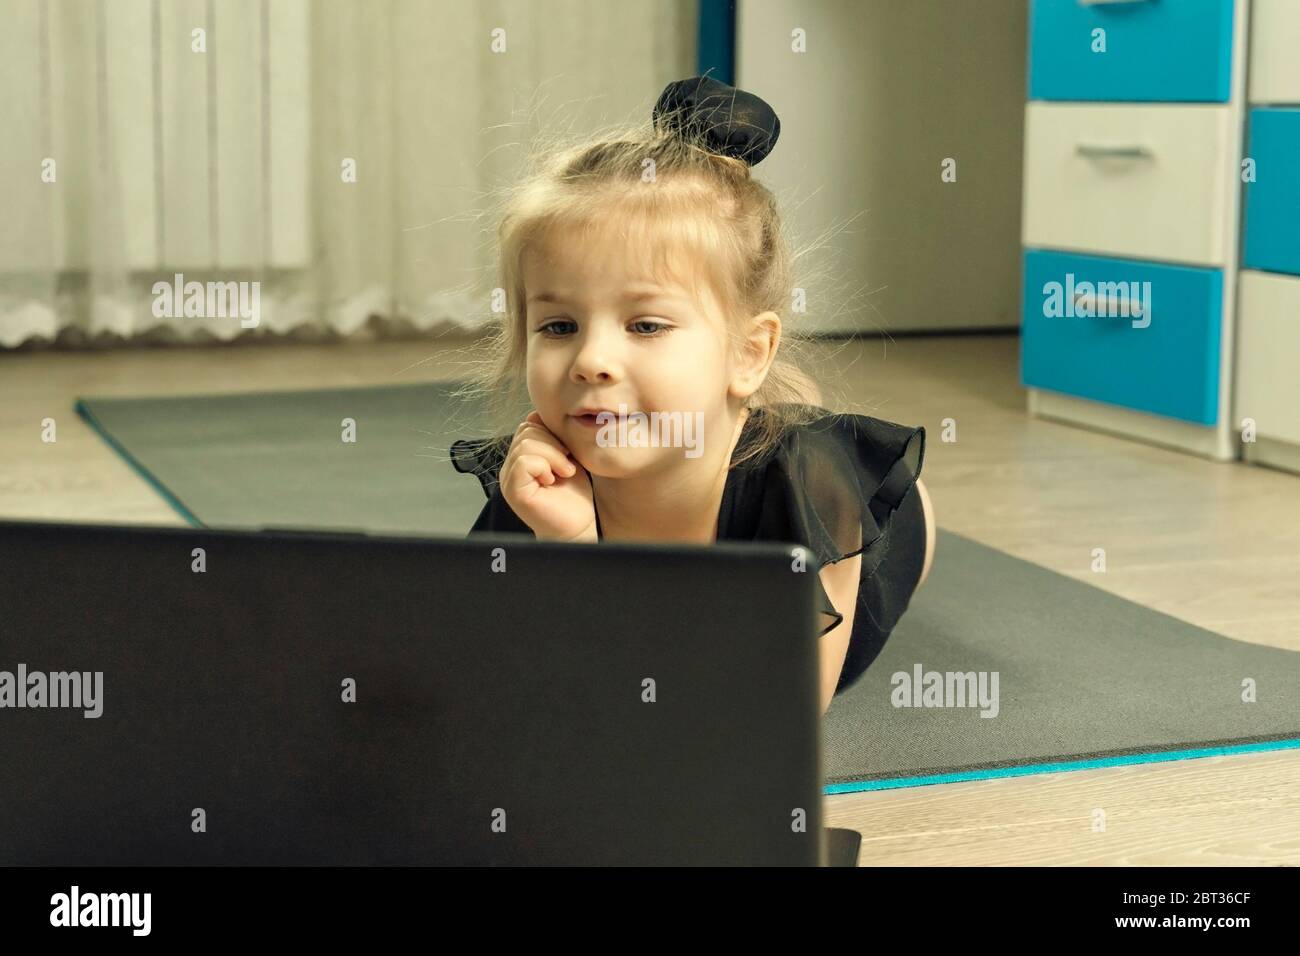 little girl in a gymnastics leotard lies on a gymnastic rug at home and is waiting for an online gymnastics lesson Stock Photo